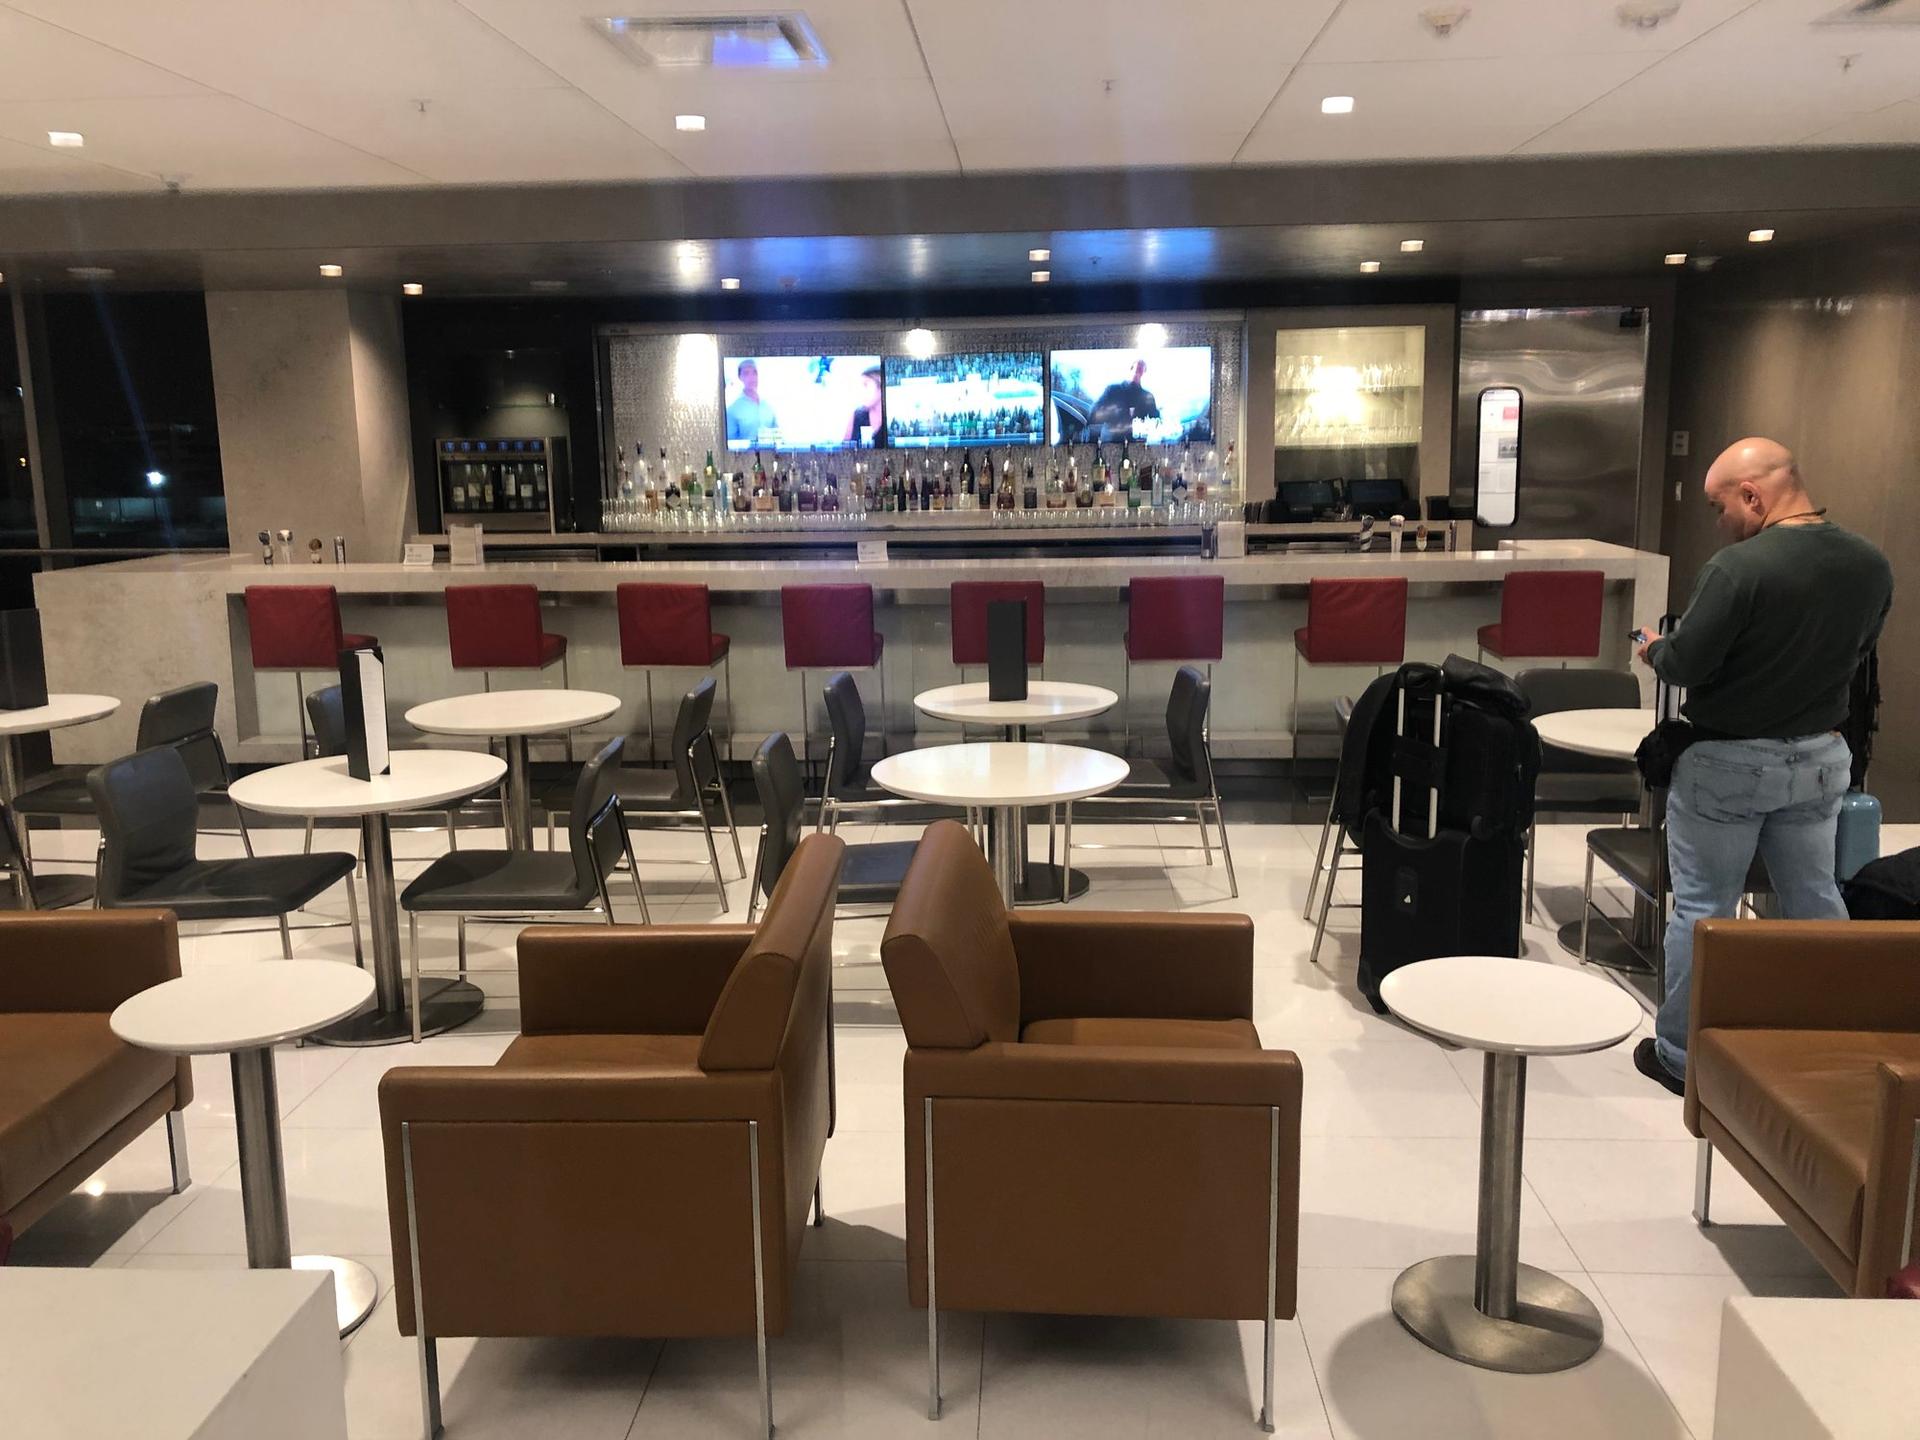 American Airlines Admirals Club (Gate D15) image 24 of 25